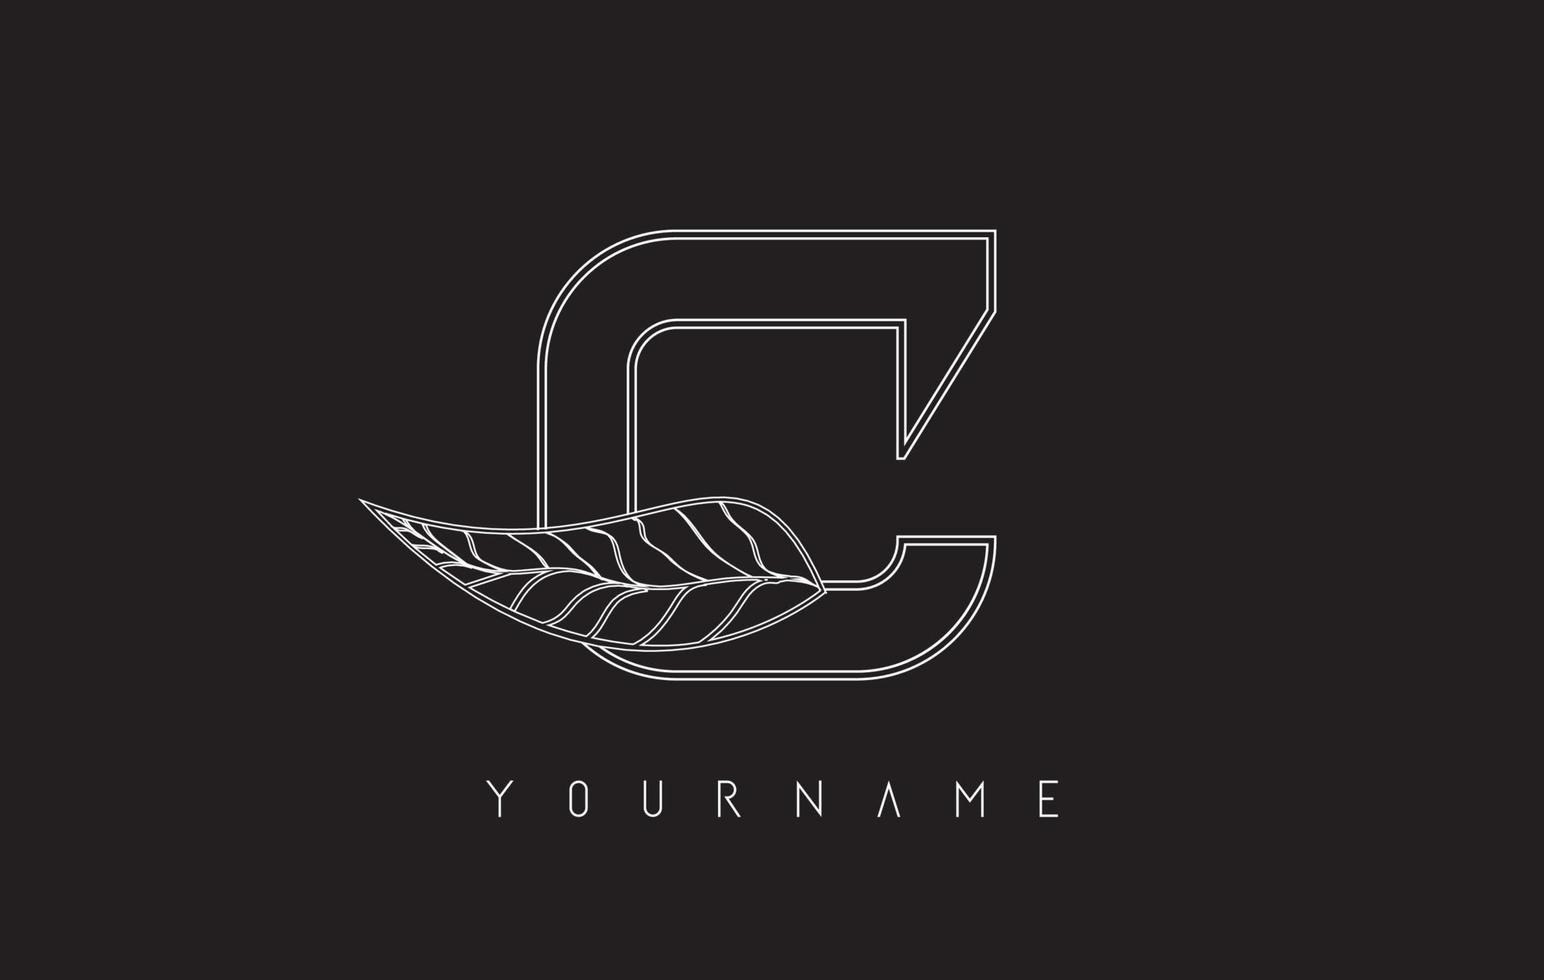 White Outline C Letter Logo with outline leaf design. Vector illustration, icon, concept for your personal branding or company.